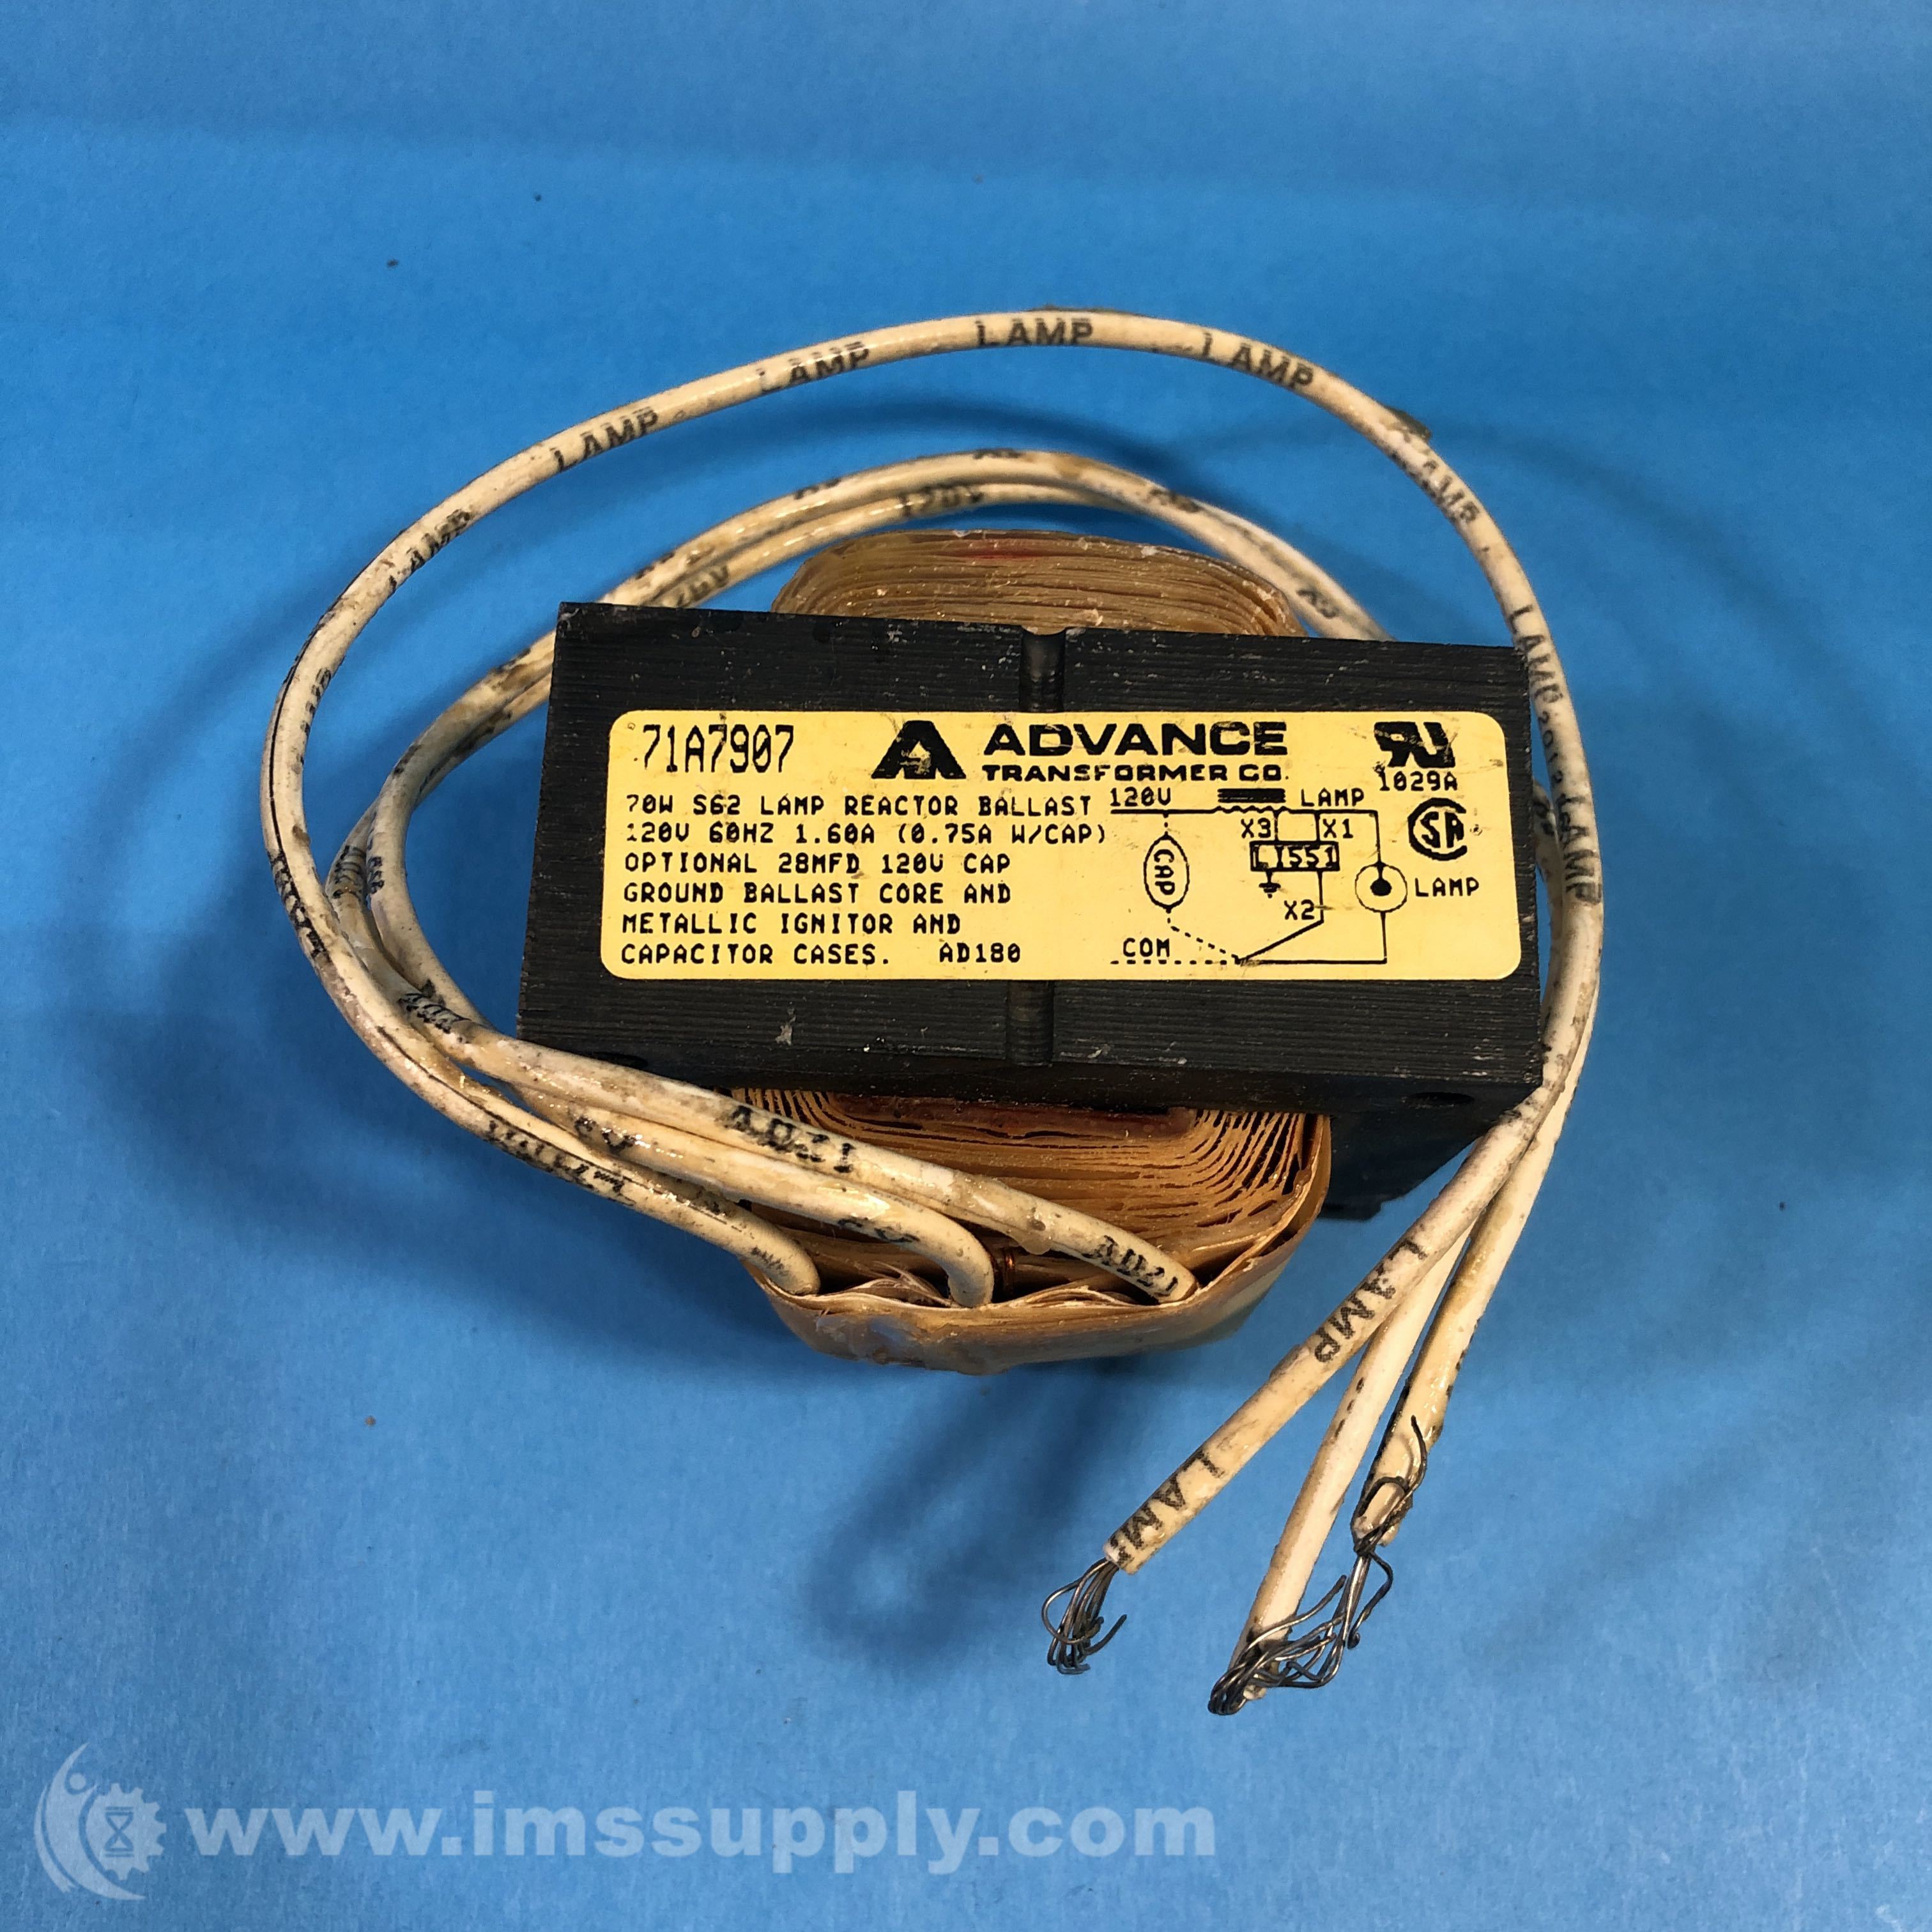 Advance 71A7807-B Integrated Ignitor Reactor Ballast For 50W S68 HPS Lamp 